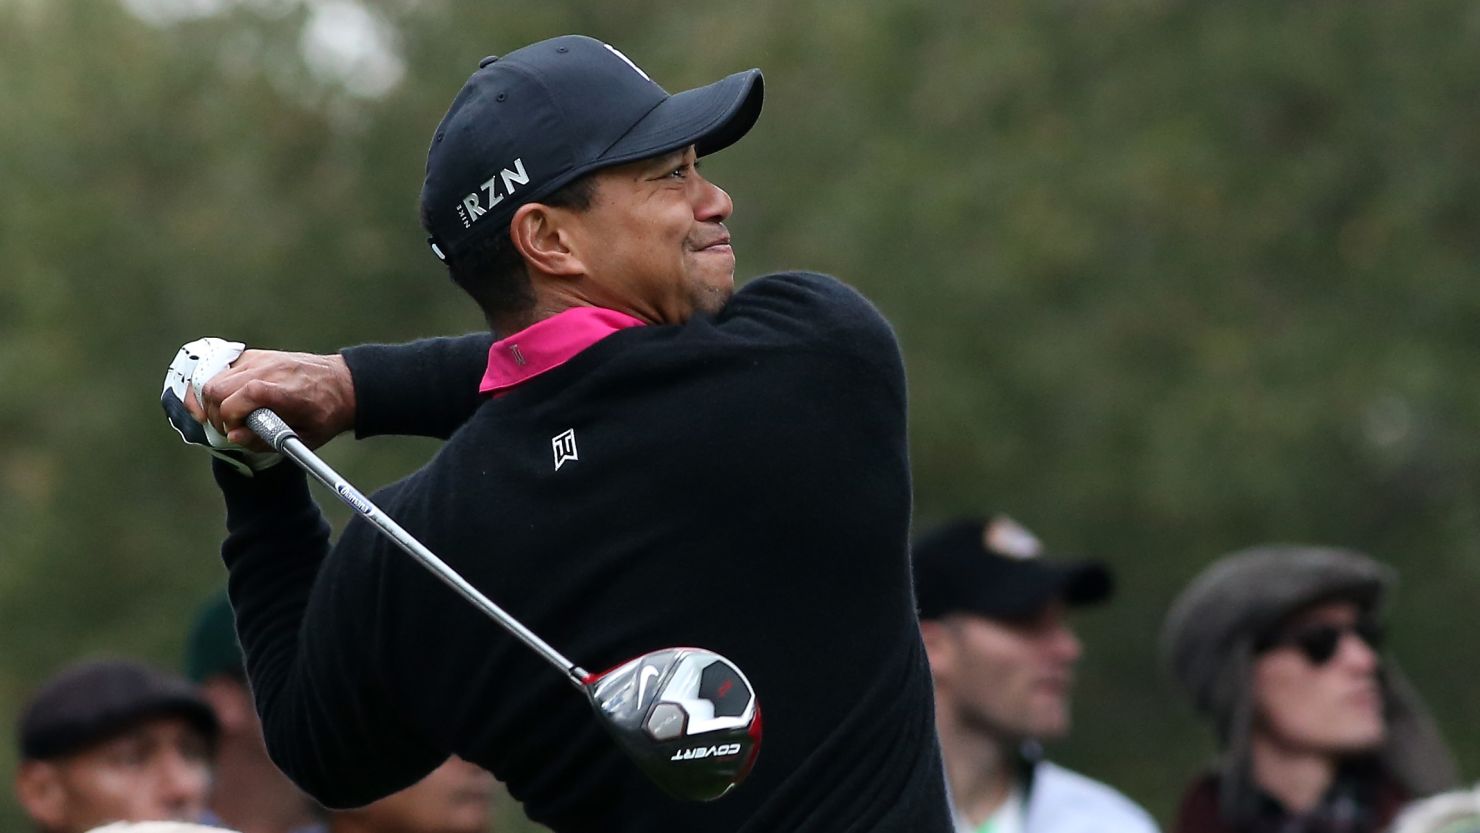 Tiger Woods hits another accurate tee shot on the way to a course record equaling 62 in California. 